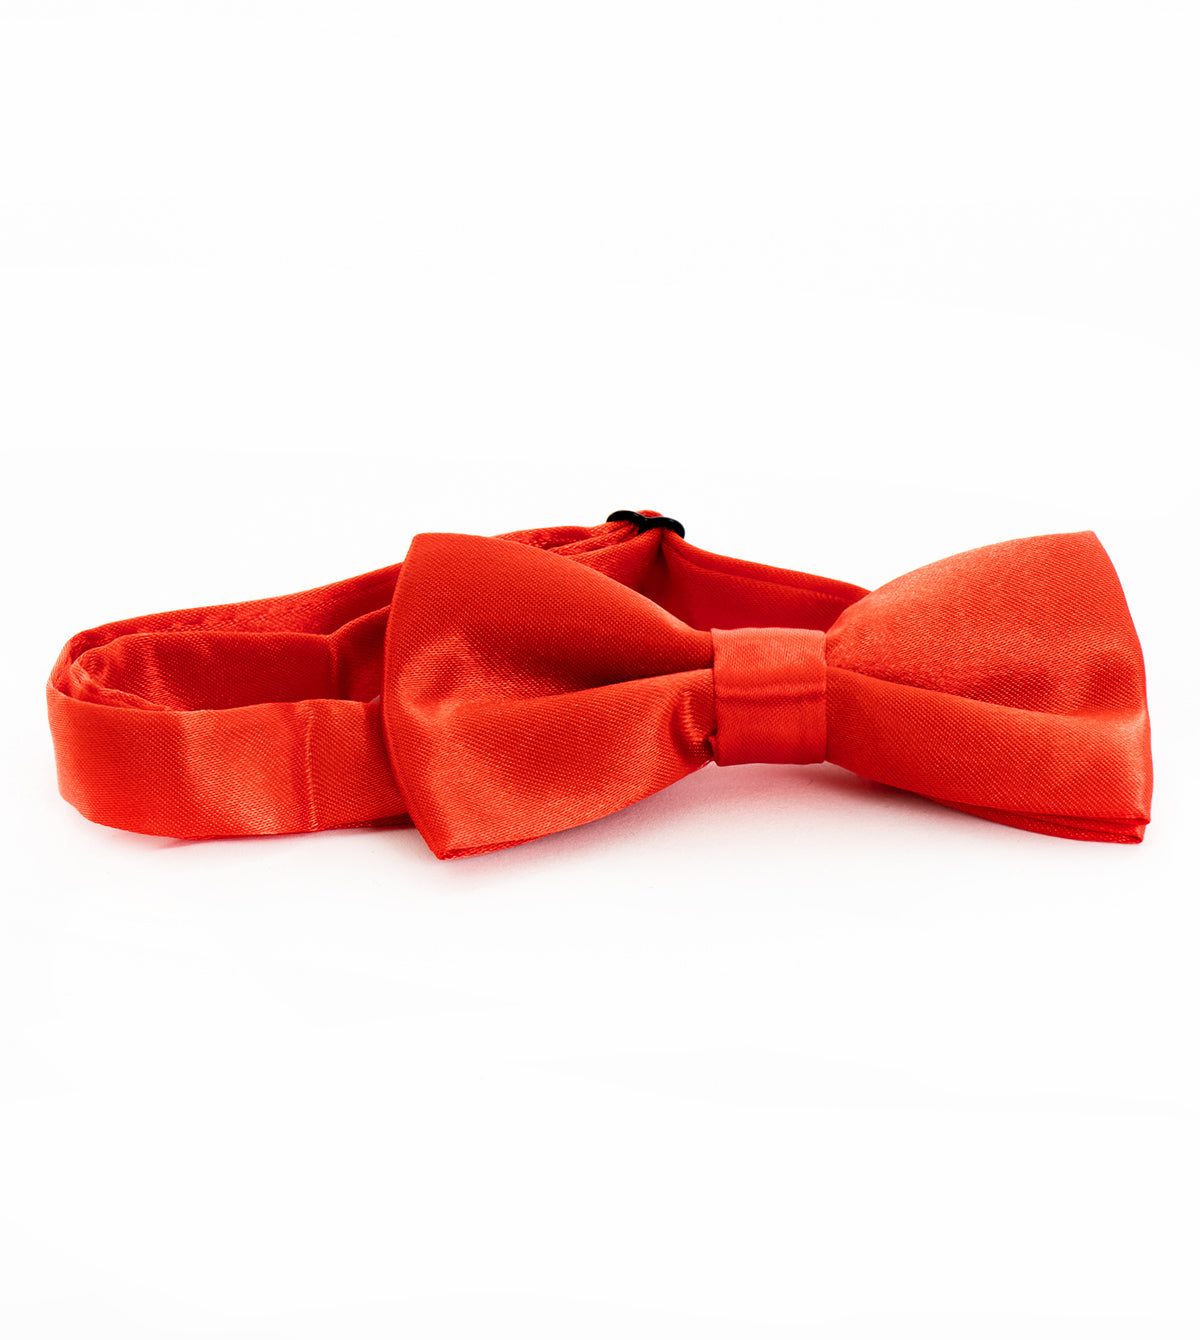 Butterfly Bow Tie Satin Man Unisex Red Bow Tie Elegant Accessory Ceremony Casual Basic GIOSAL-CP1060A